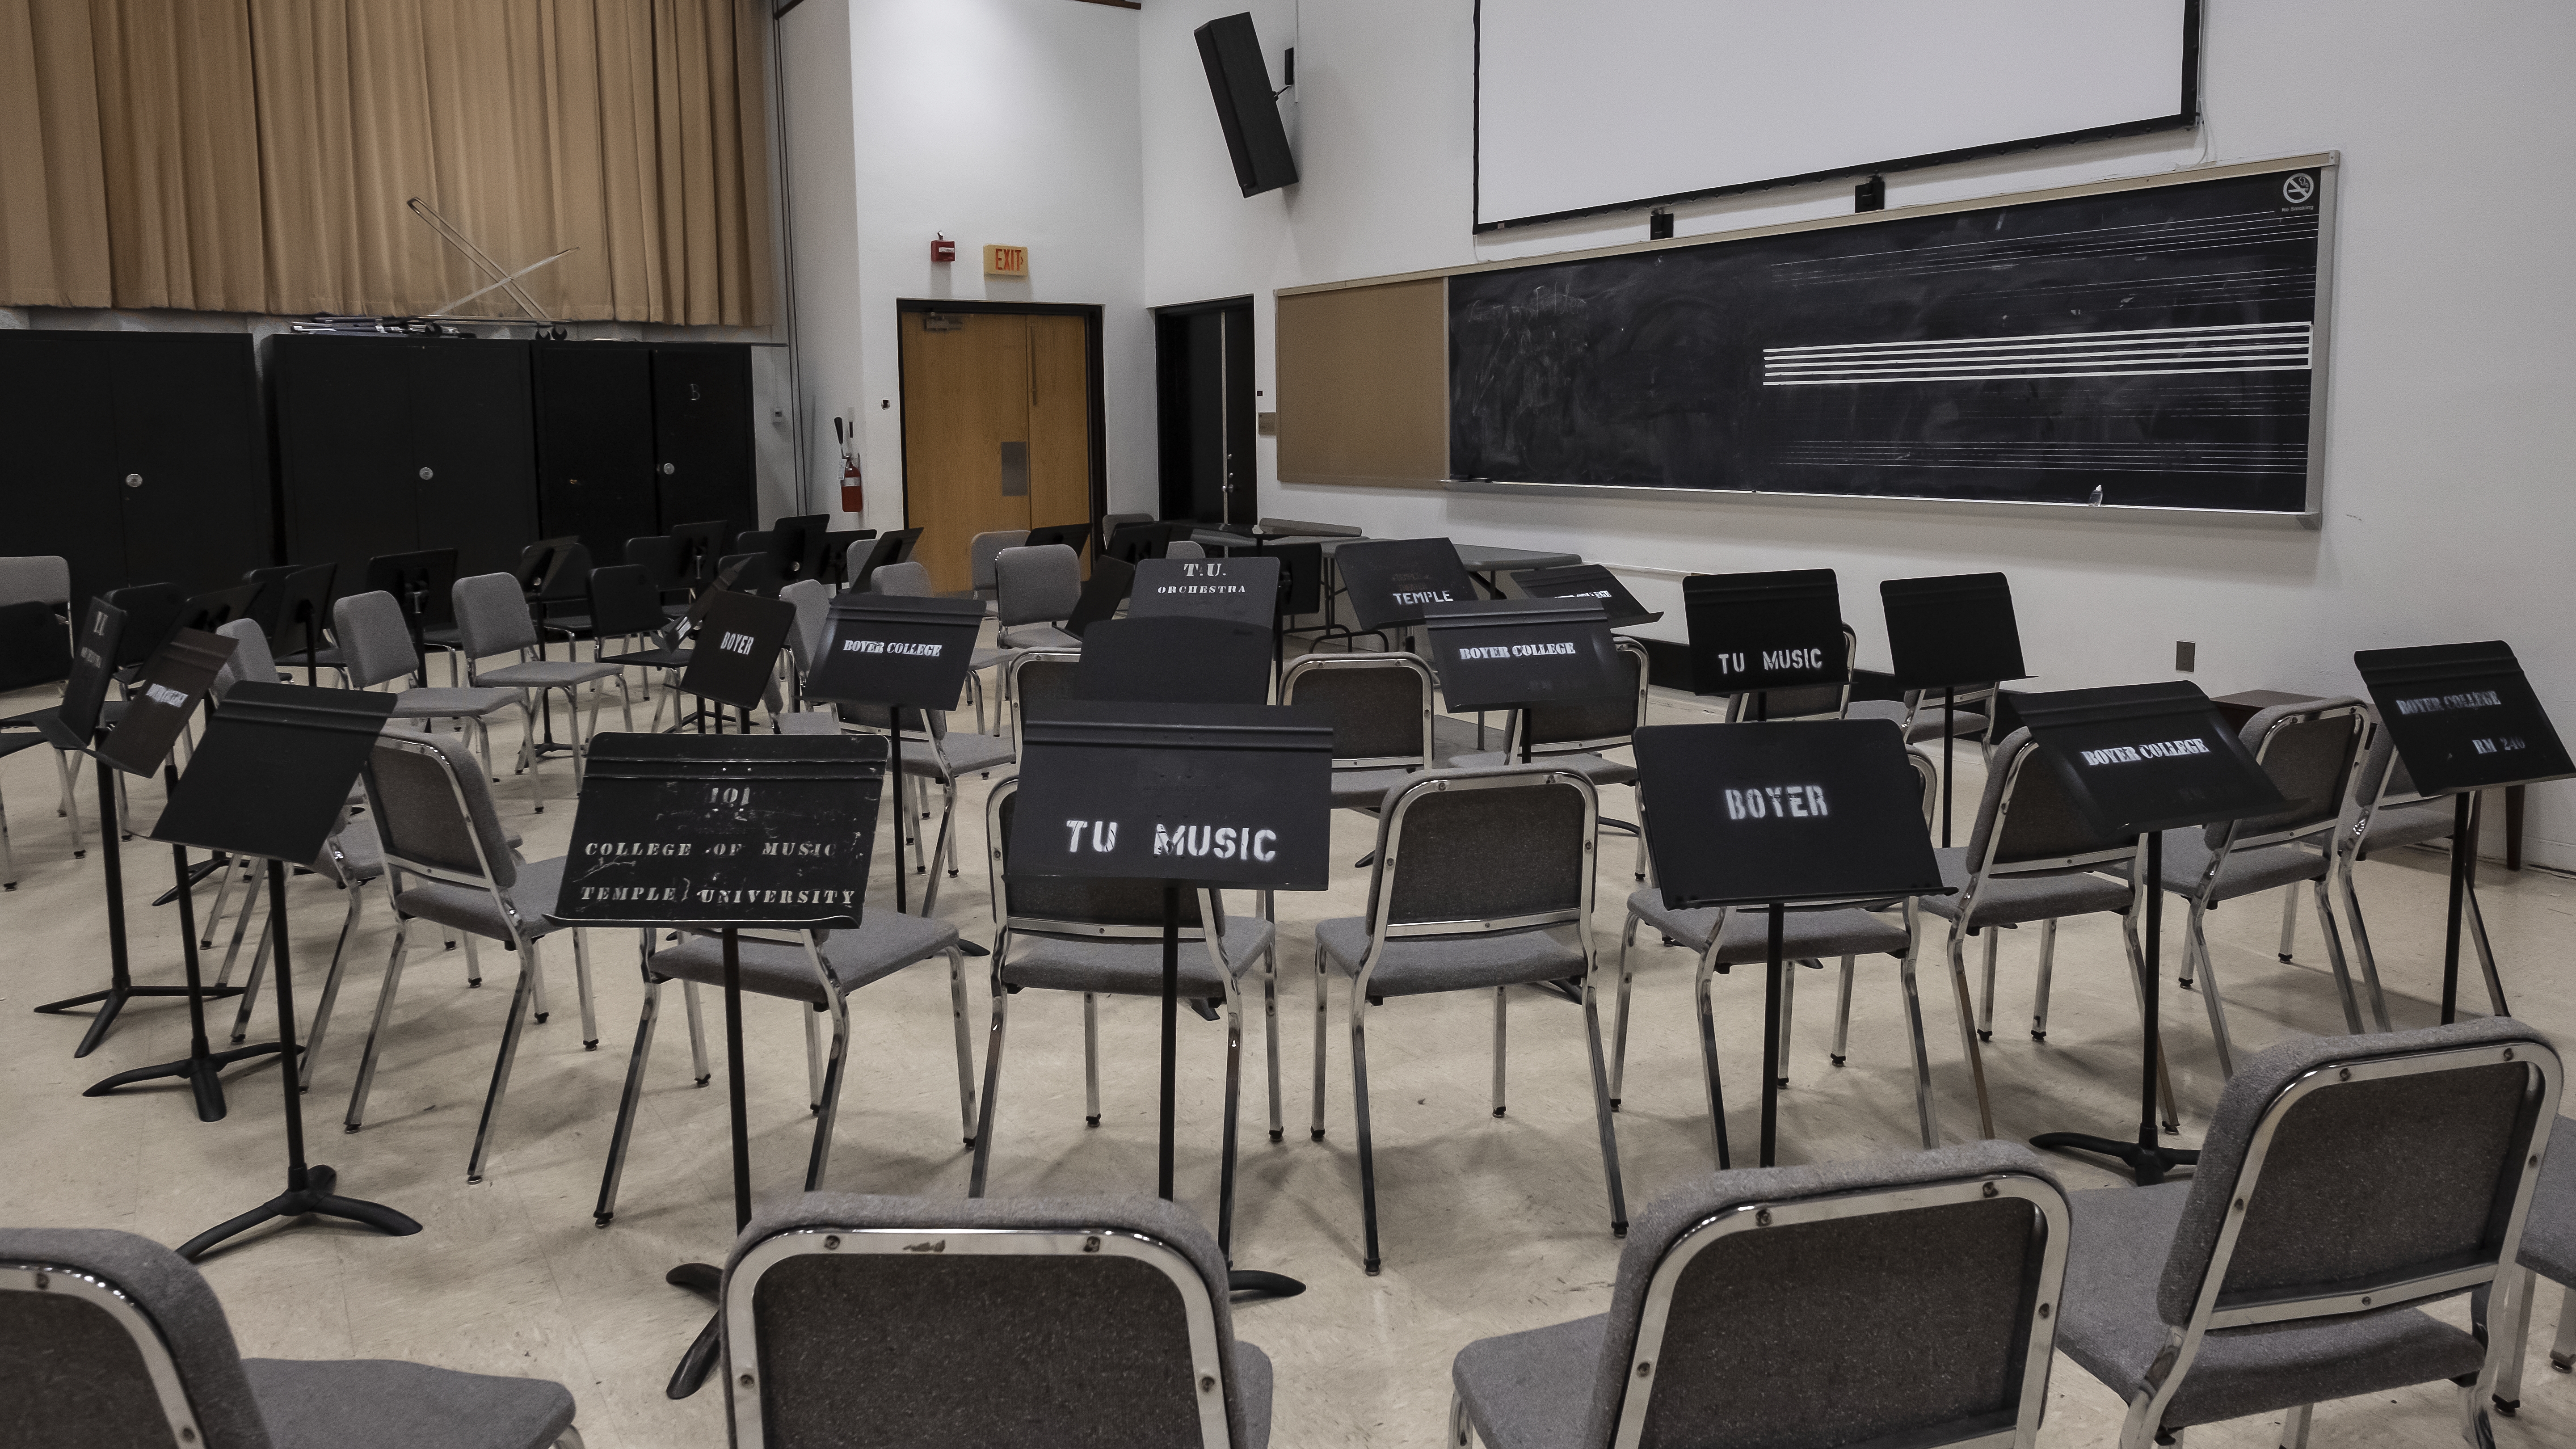 Three rows of chairs in a semicircle, facing podium and chalkboard 